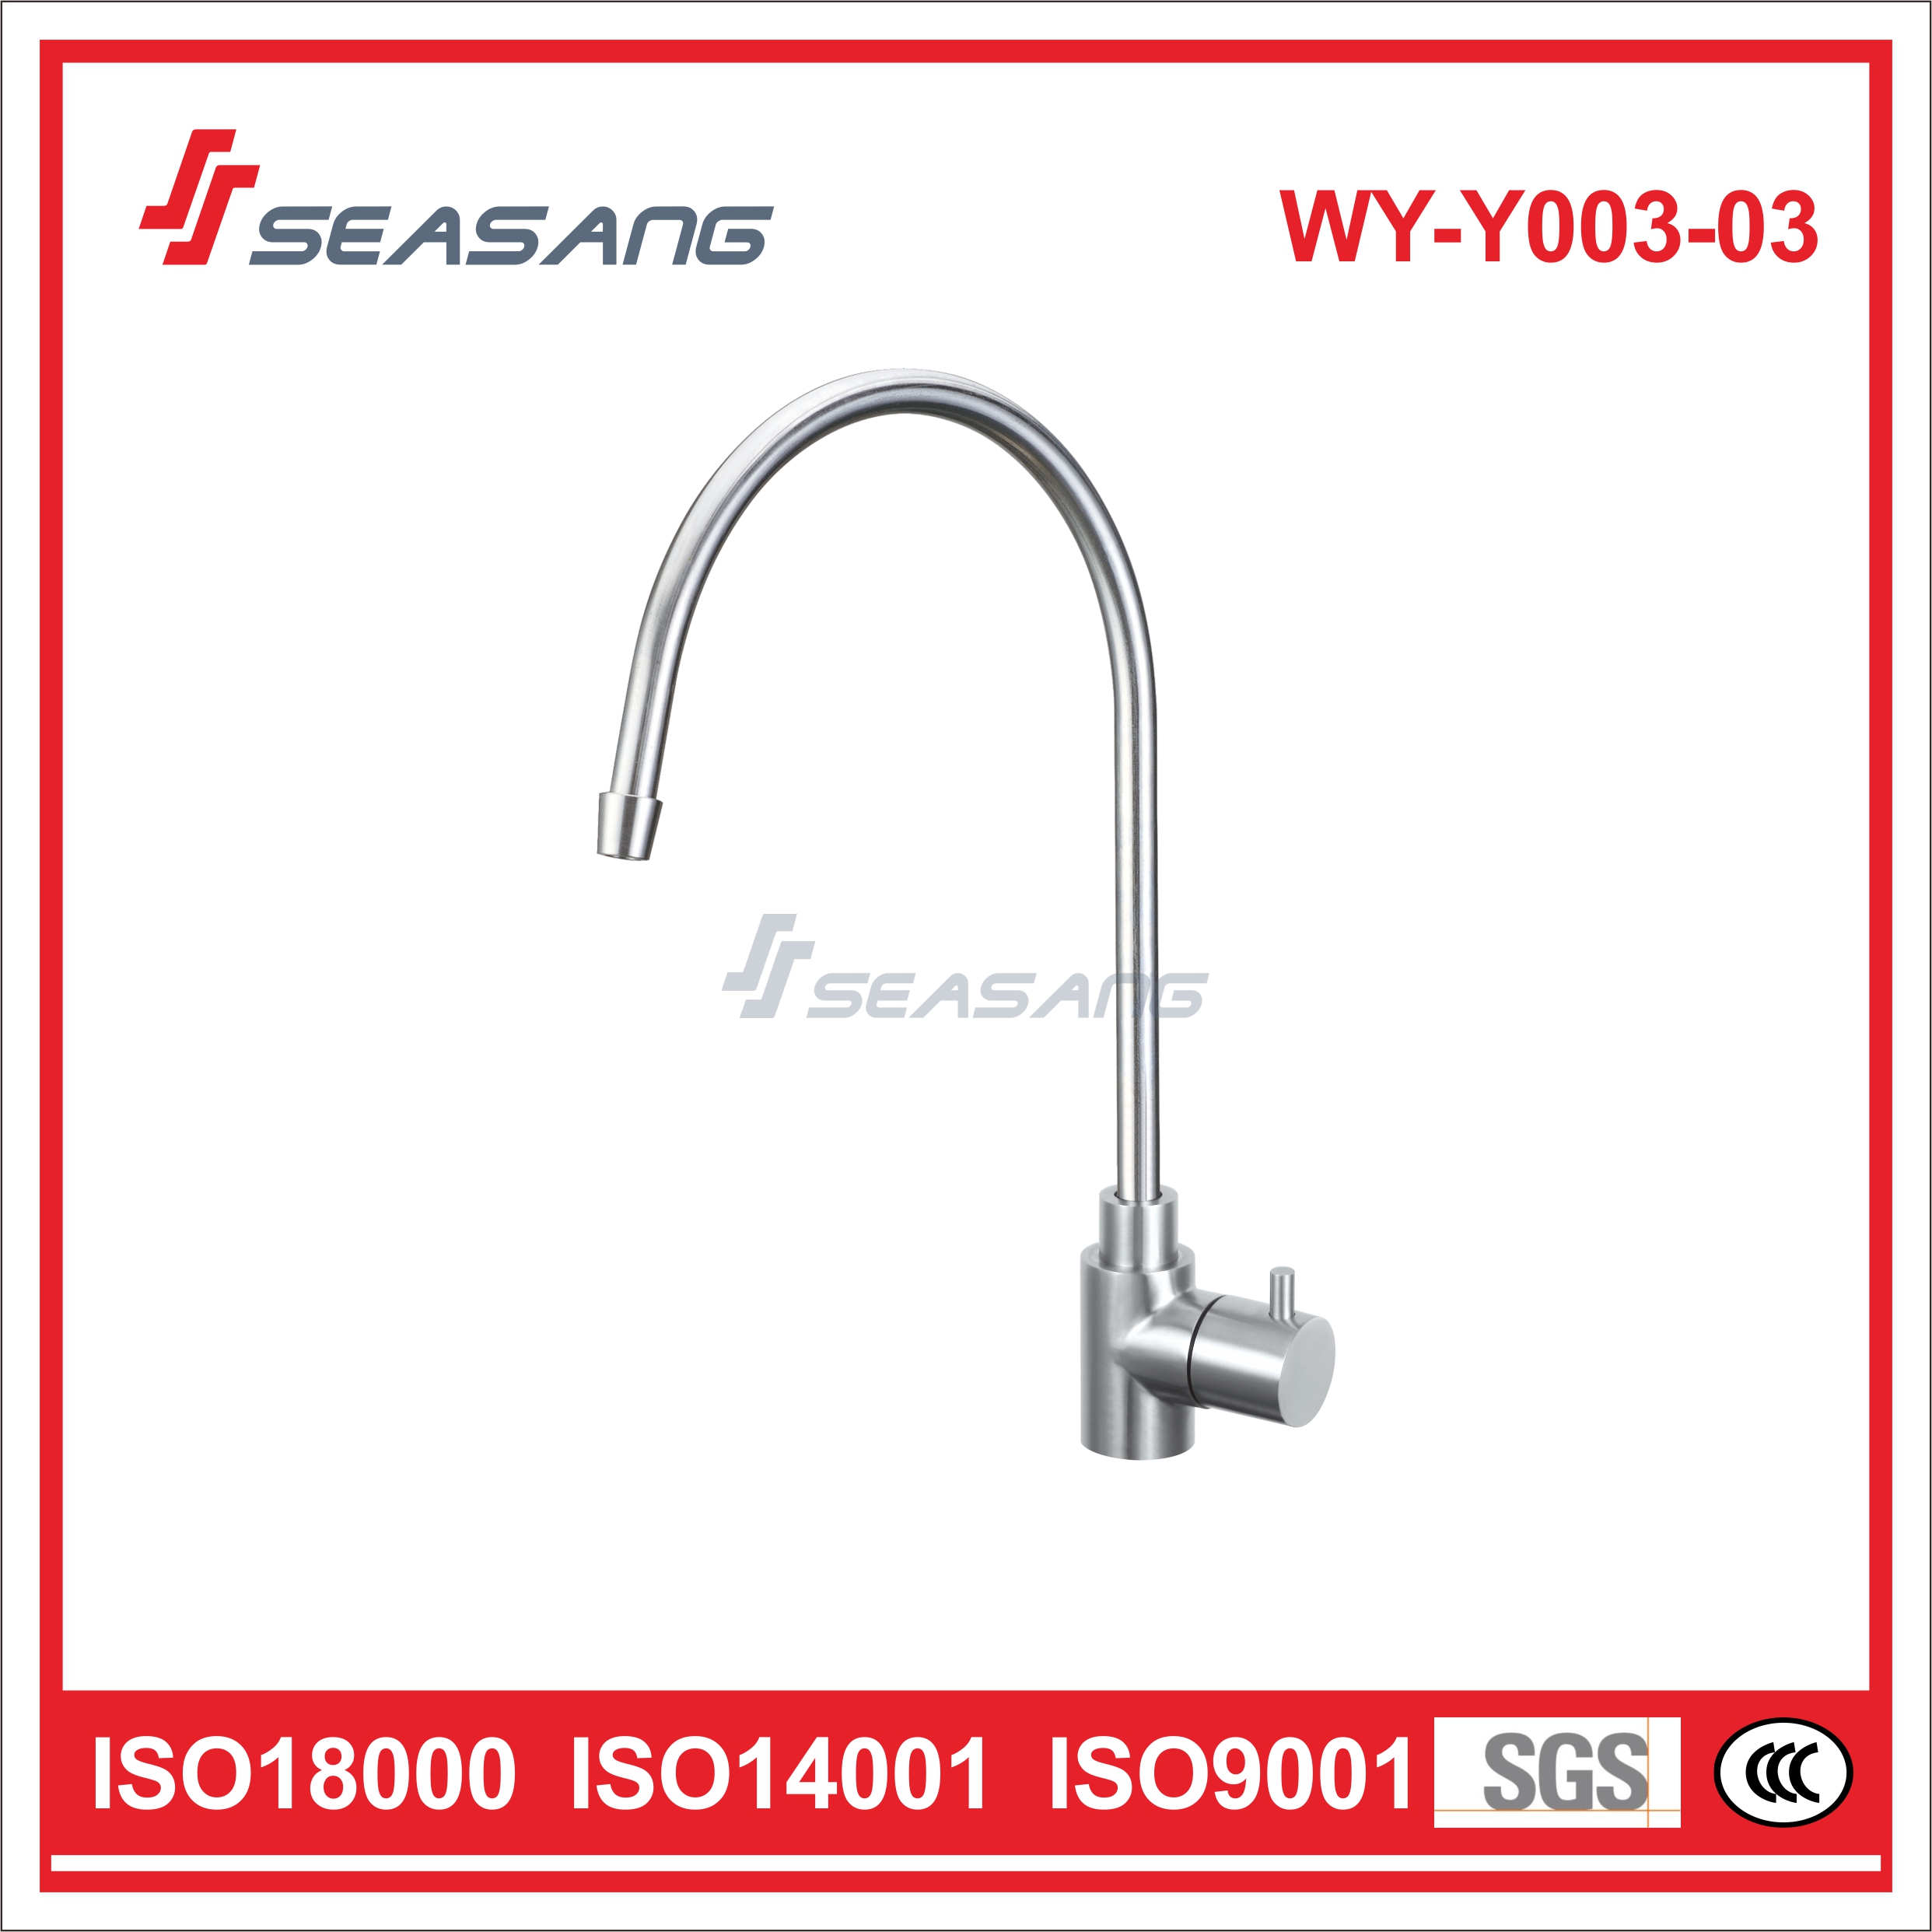 Choosing a Stainless Steel Kitchen Faucet